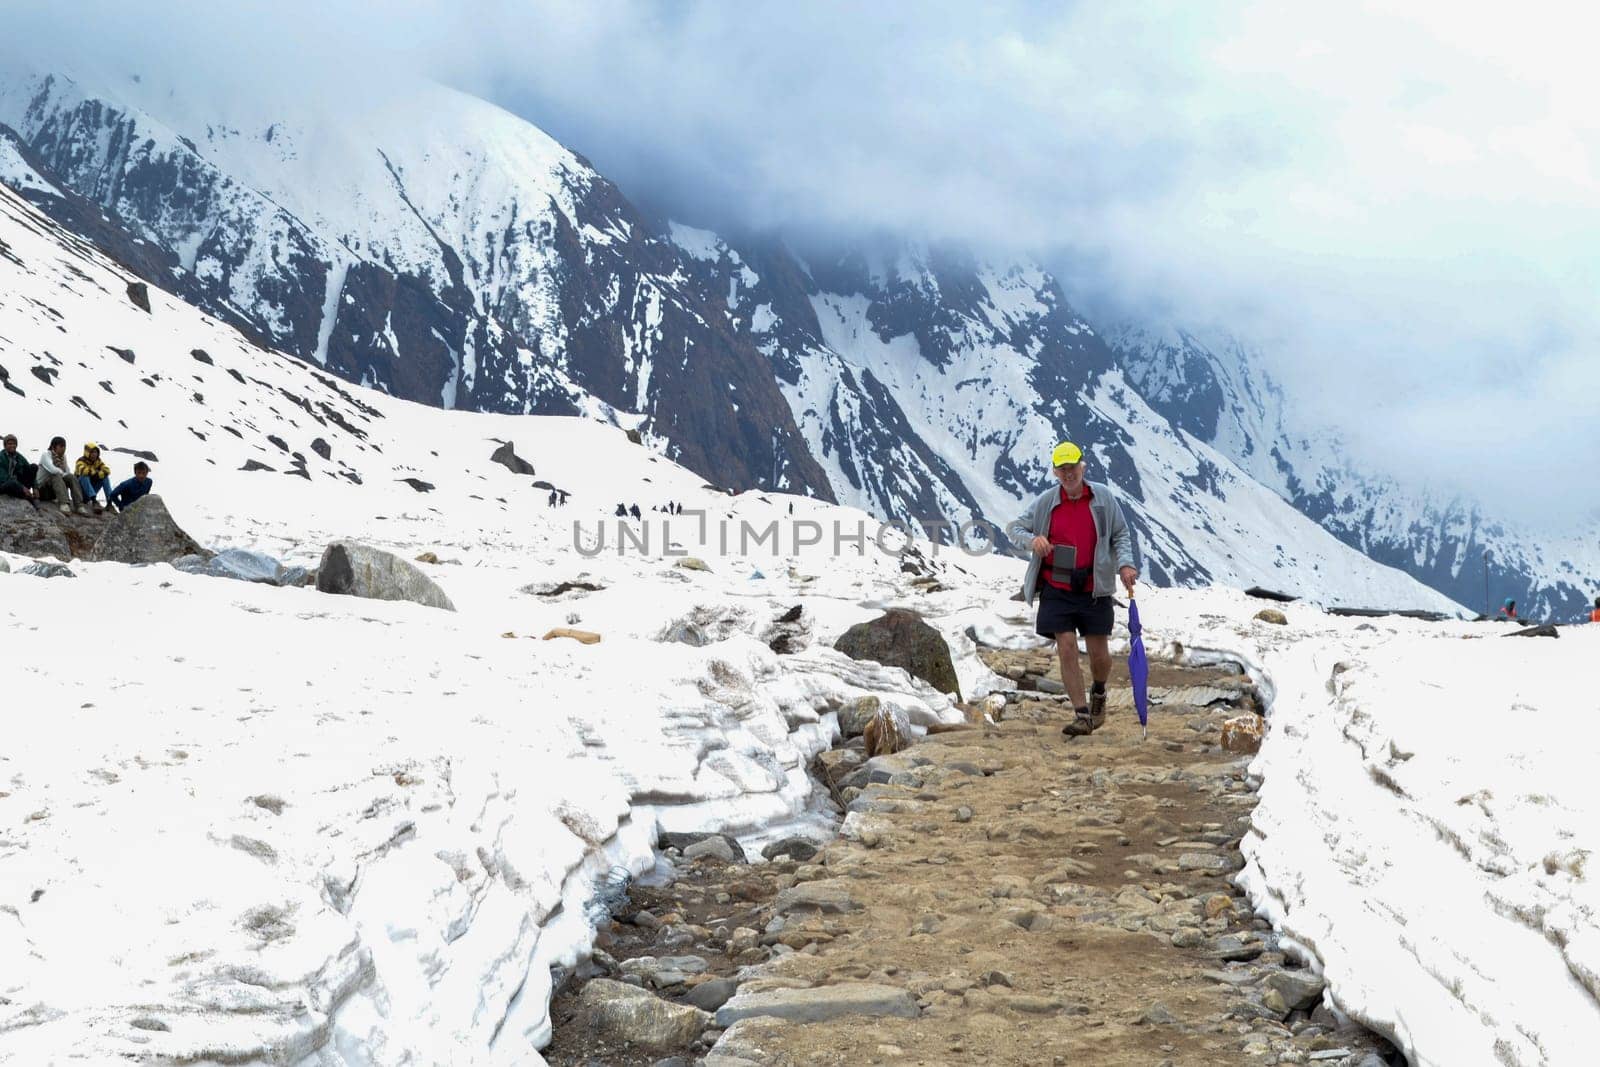 Rudarprayag, Uttarakhand, India, May 18 2014, A foreigner passing through the Kedarnath trek amidst snow. Kedarnath is a town in the Indian state of Uttarakhand and has gained importance because of Kedarnath Temple.